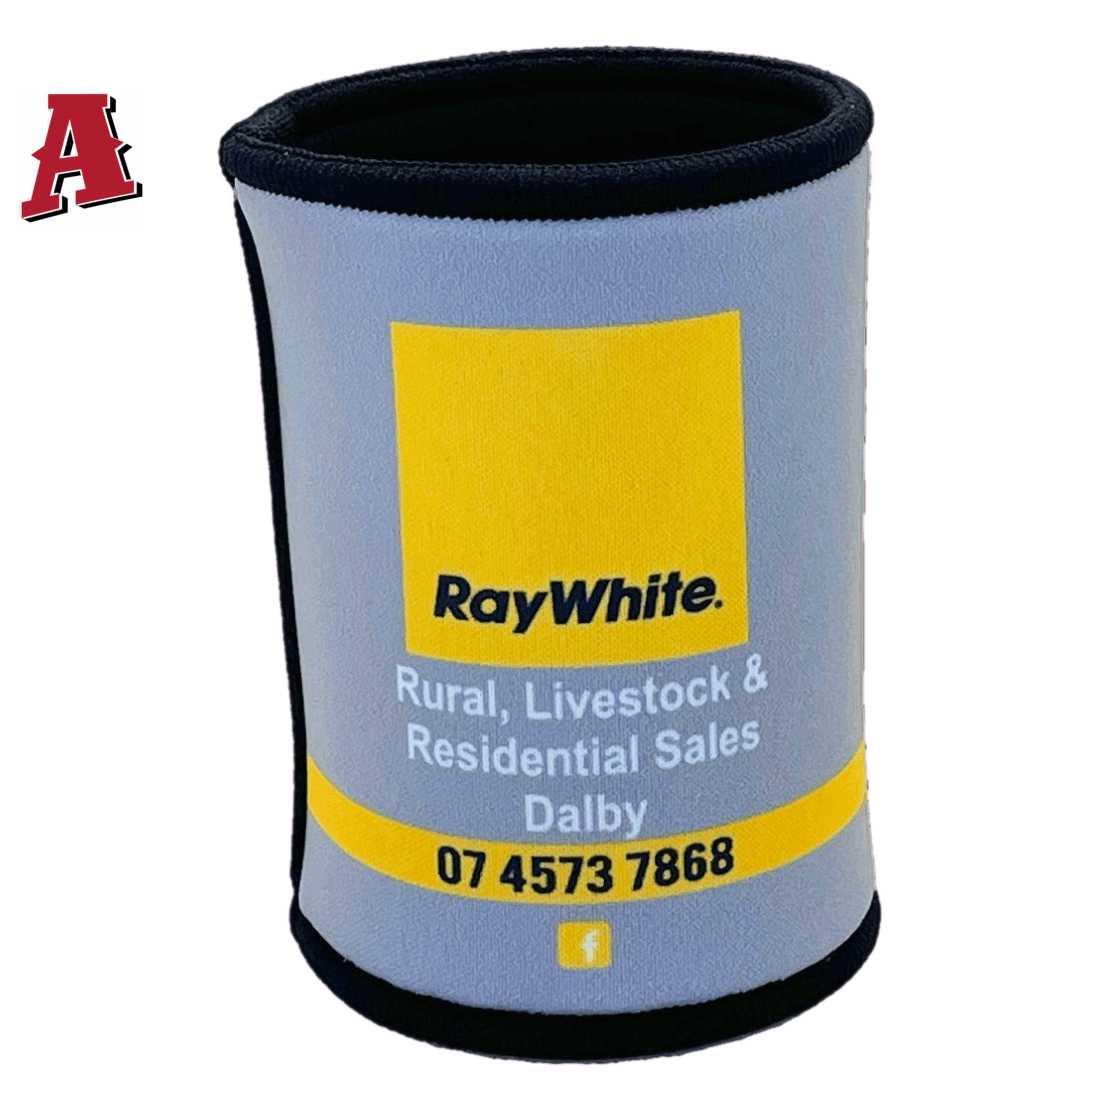 Ray White Rural Dalby QLD Aussie Custom Stubby Holder Koozie 5mm Premium Neoprene with Taped and Stitched Seams Grey